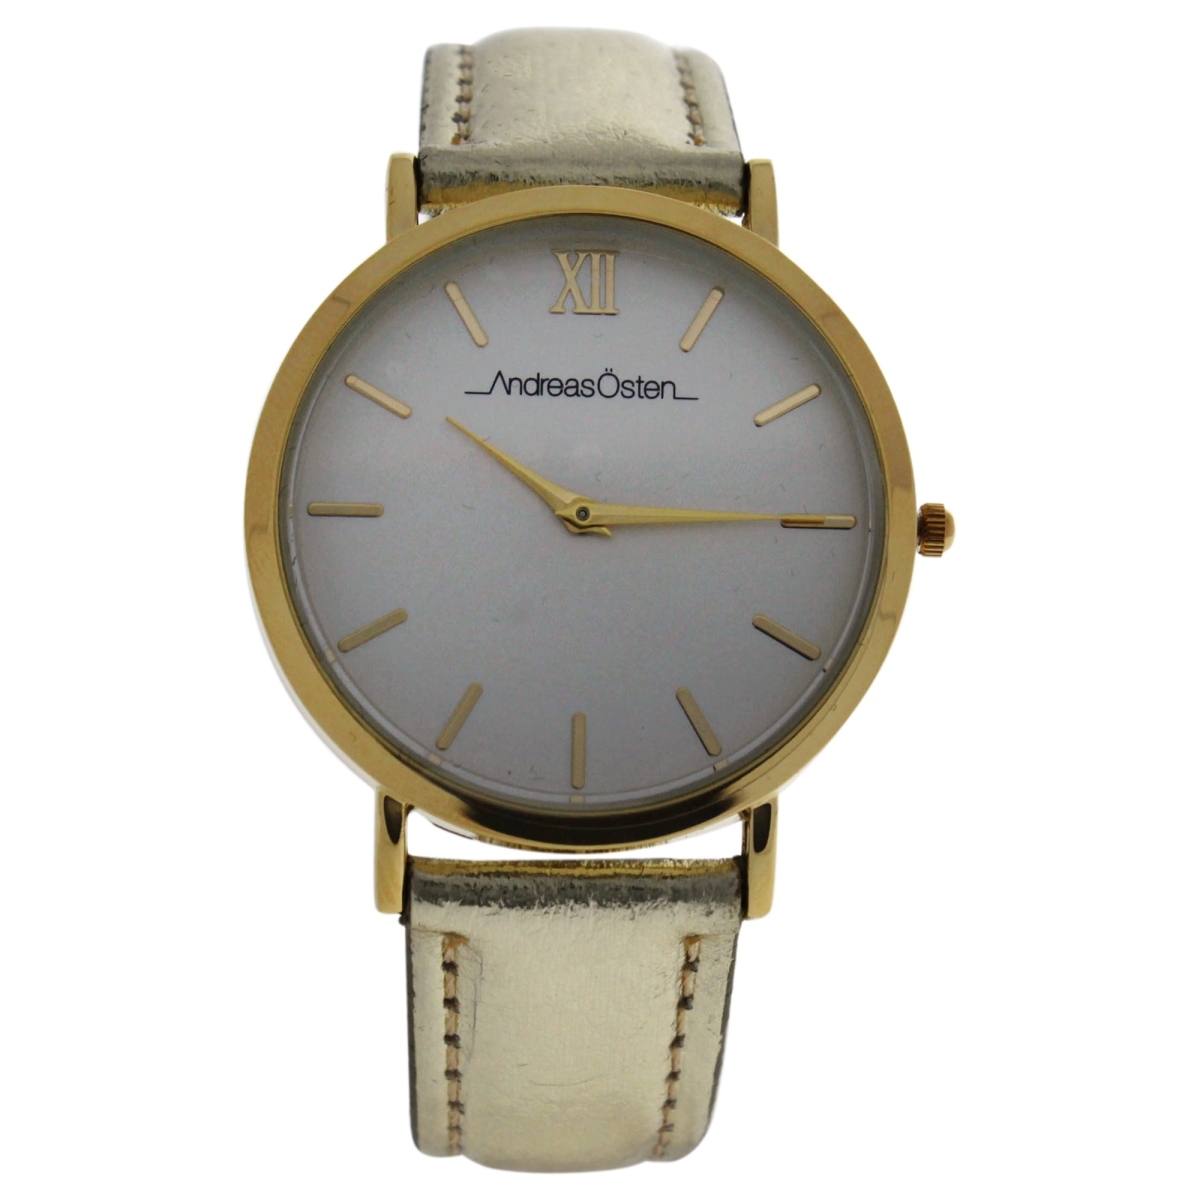 W-wat-1449 Hygge Gold & Champagne Gold Leather Strap Watch For Women, Ao-199